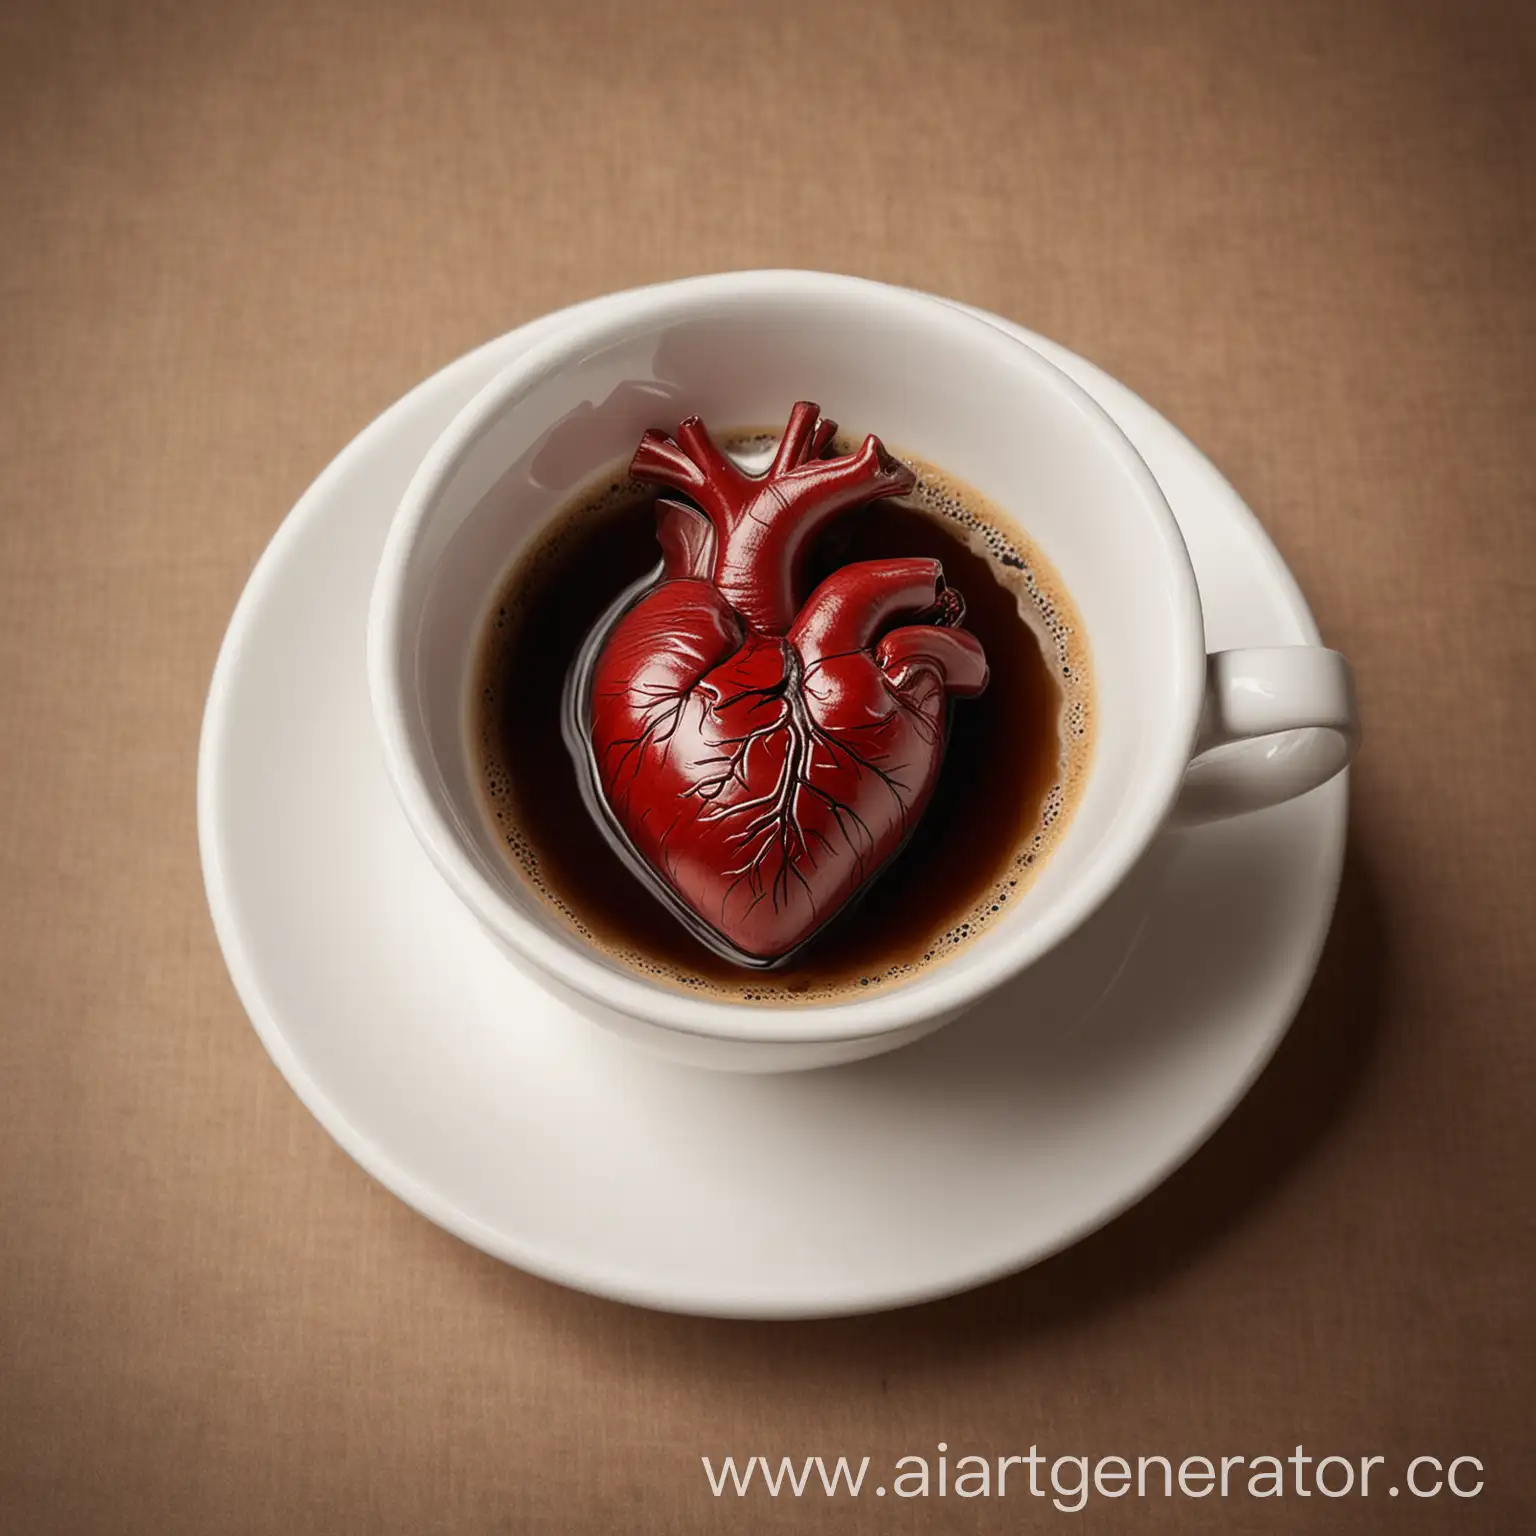 Anatomically-Correct-Heart-in-Coffee-Cup-with-Spilled-Coffee